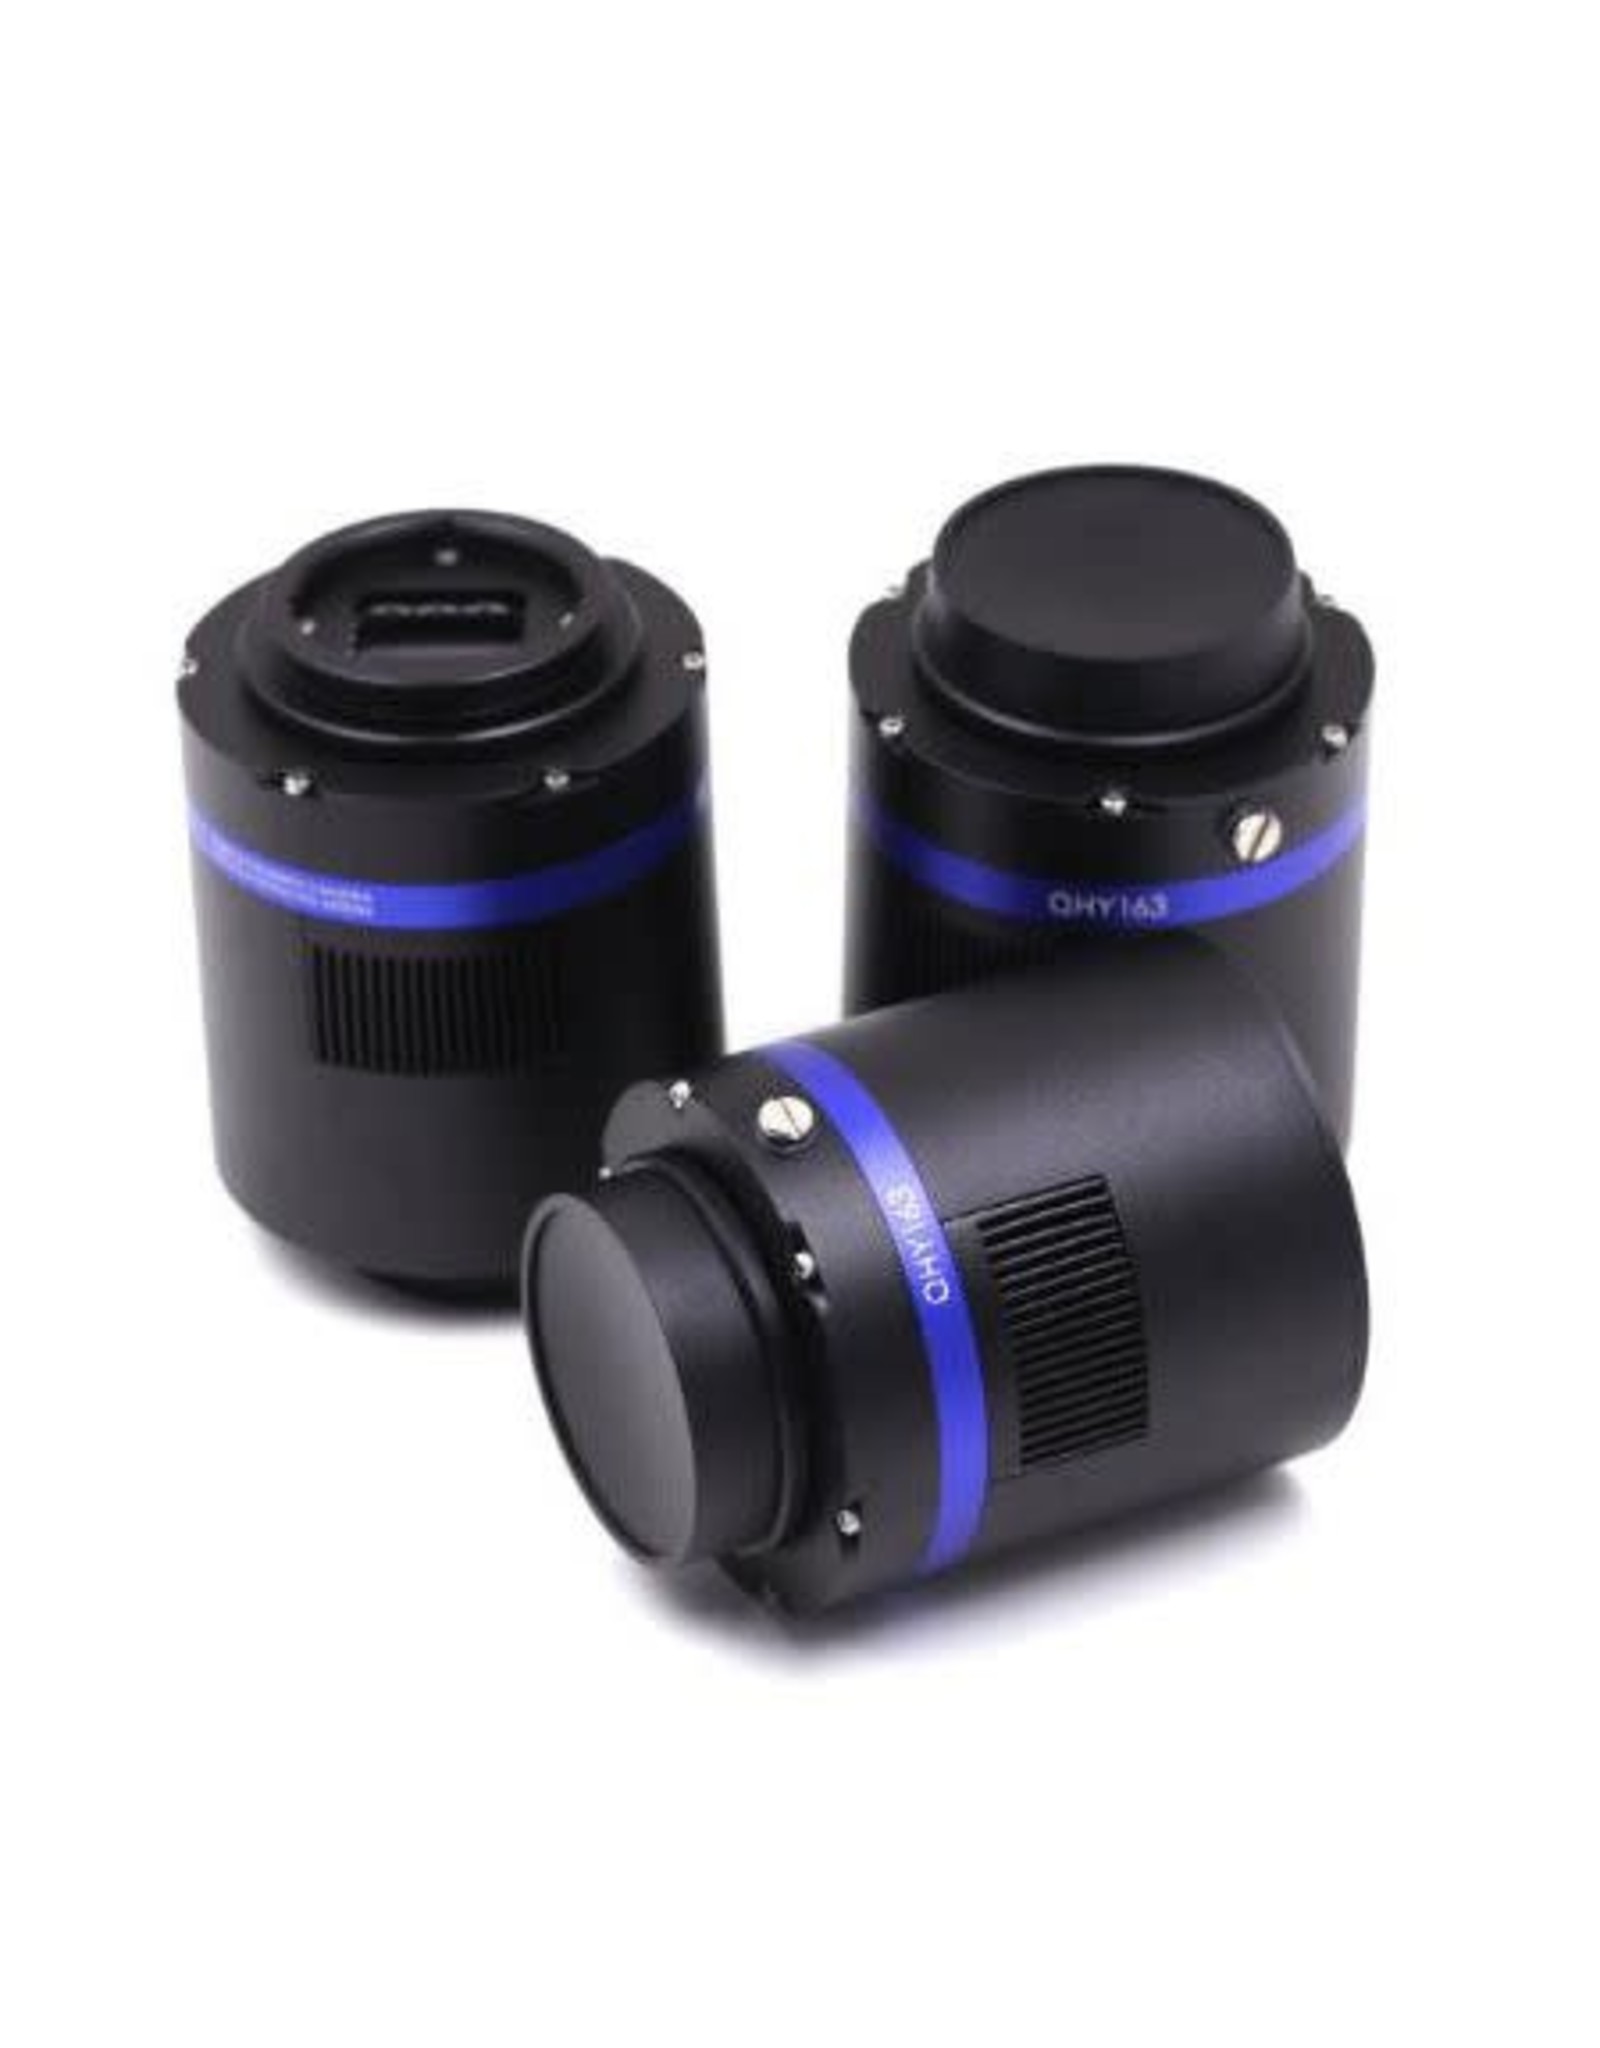 QHYCCD QHY 183M Monochrome Cooled Camera with CFW3S-SR-7 Filter Wheel for 31 mm or 1.25" Filters - QHY183M-CFW3S-SR-7